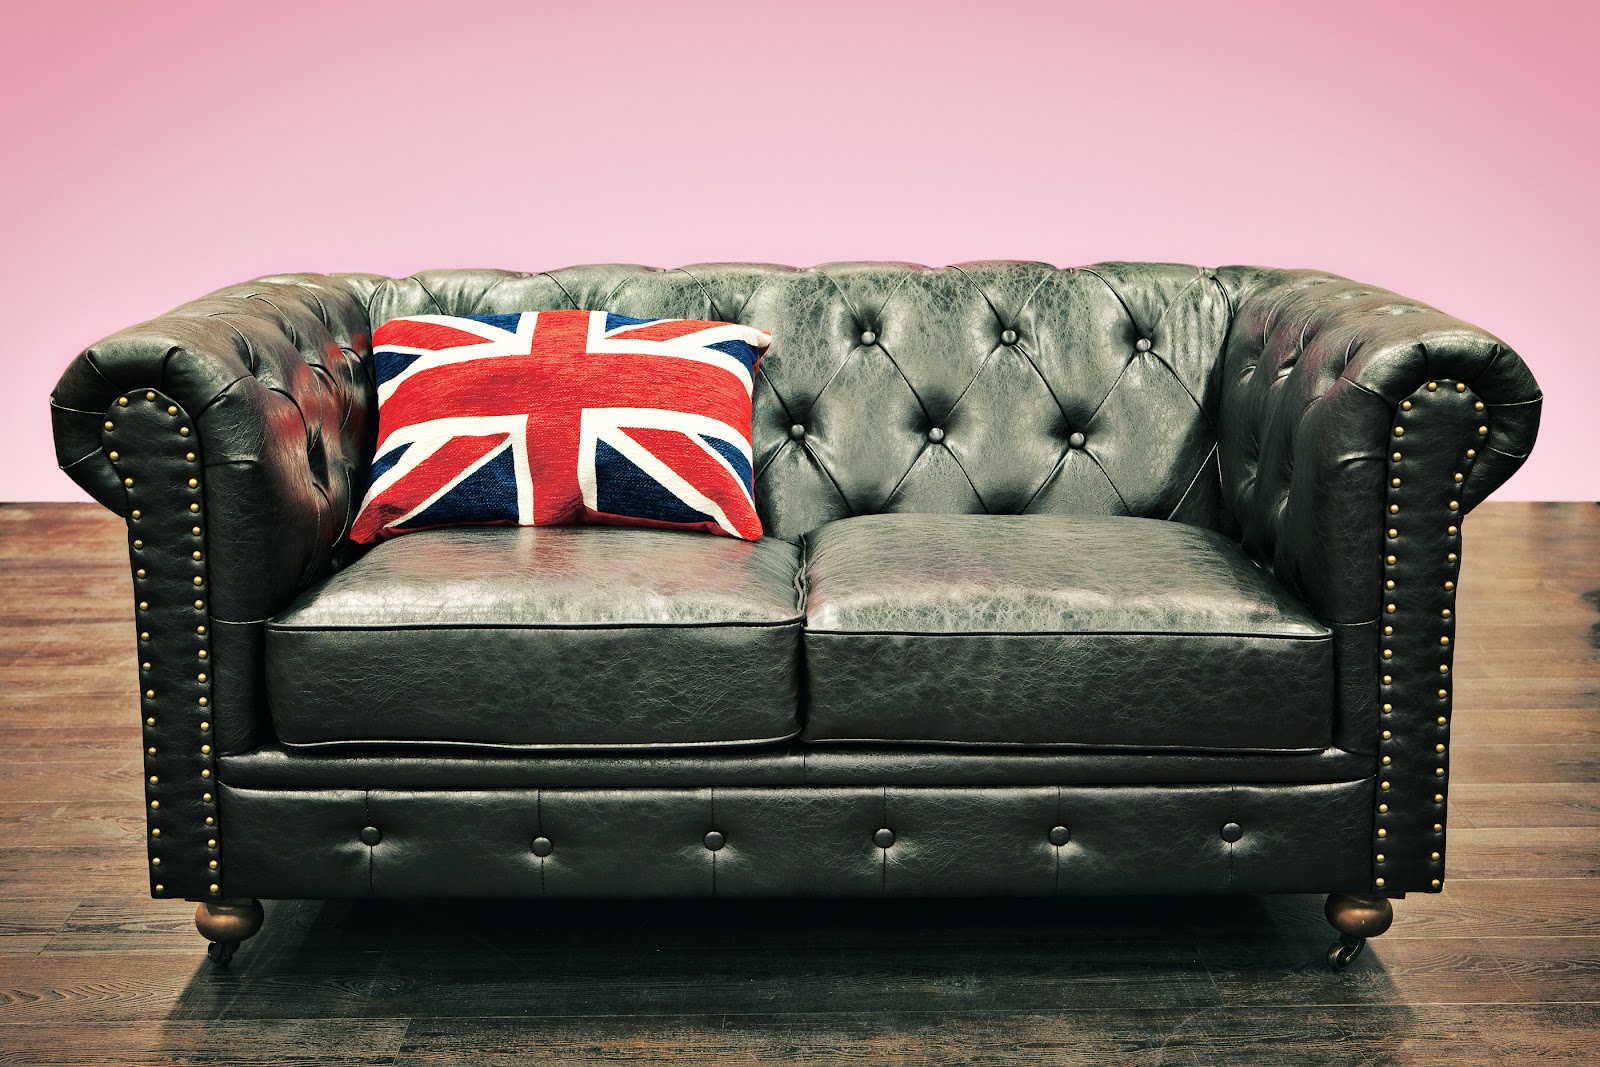 bigstock-Chesterfield-Couch-With-Union--45472651.jpg